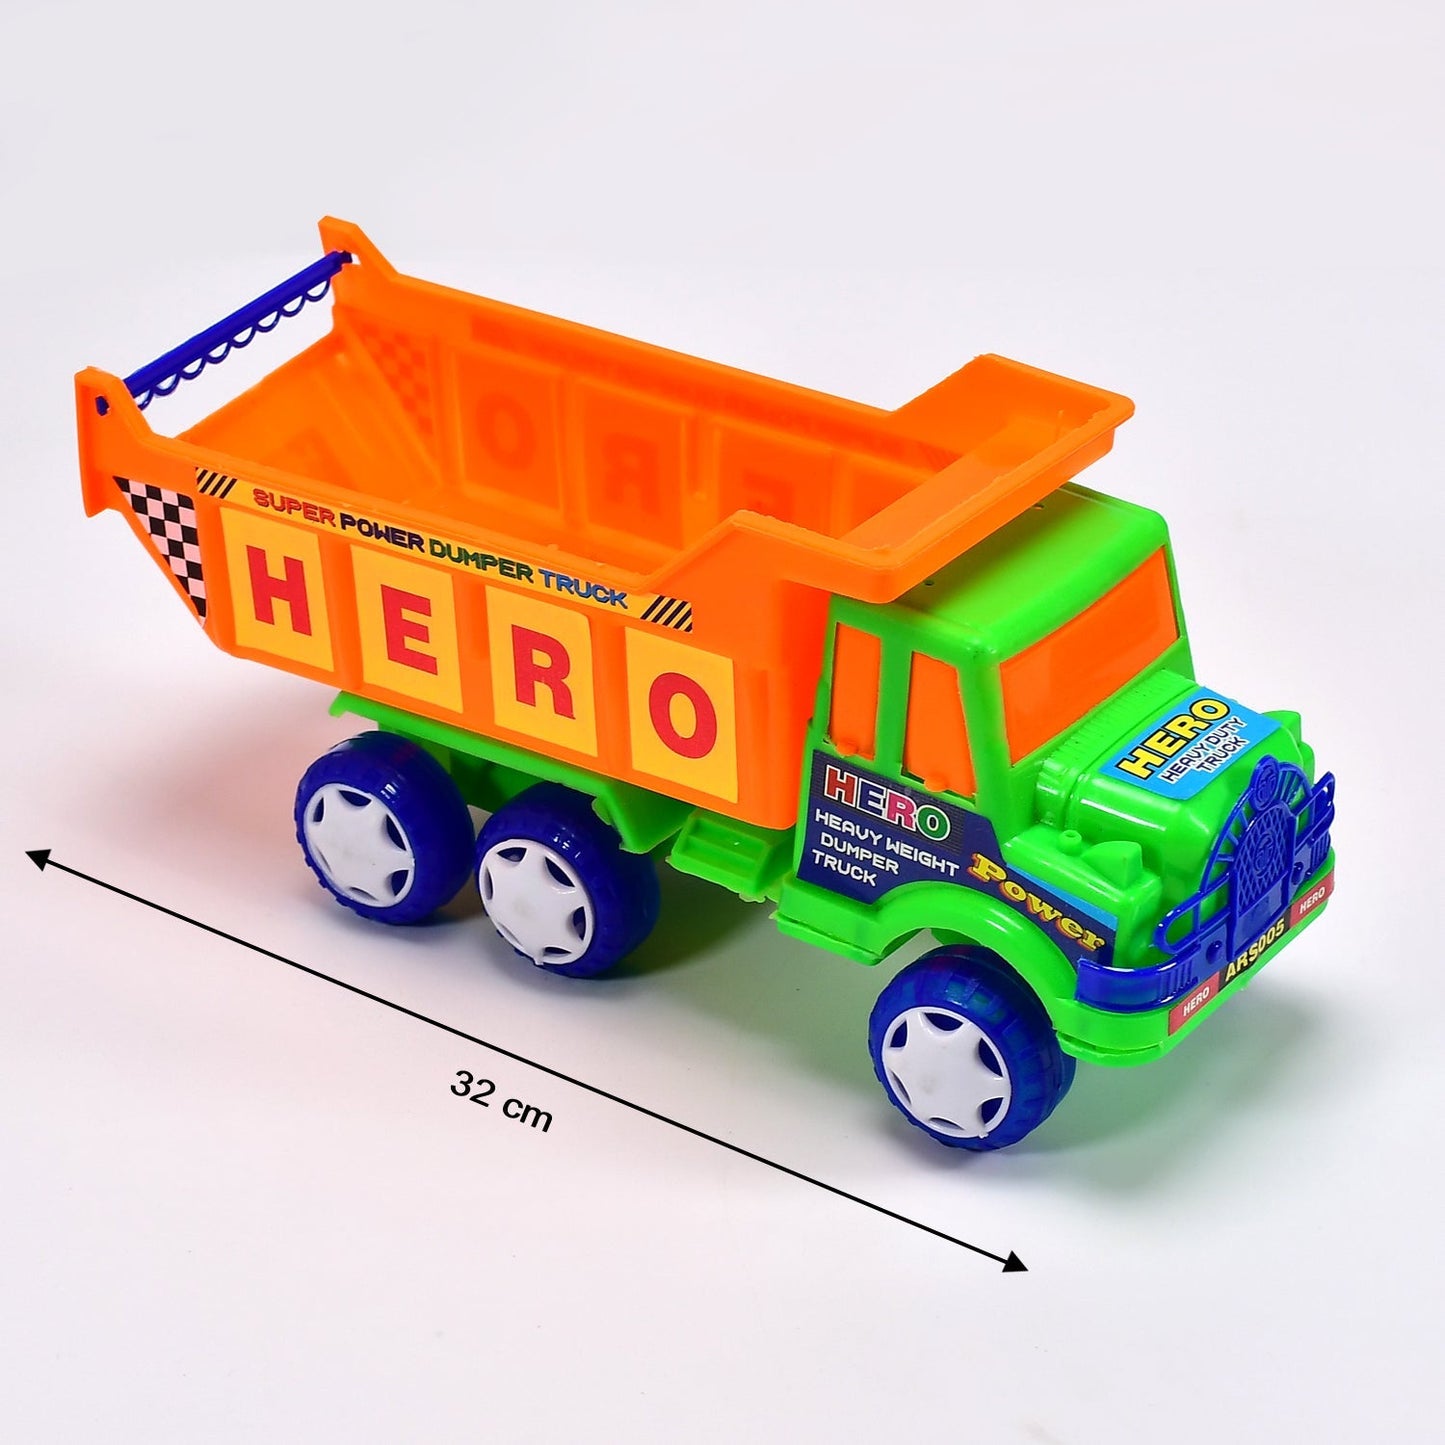 4450 Truck Toy - Jumbo Large Size Plastic Heavy Weight Truck Toy DeoDap